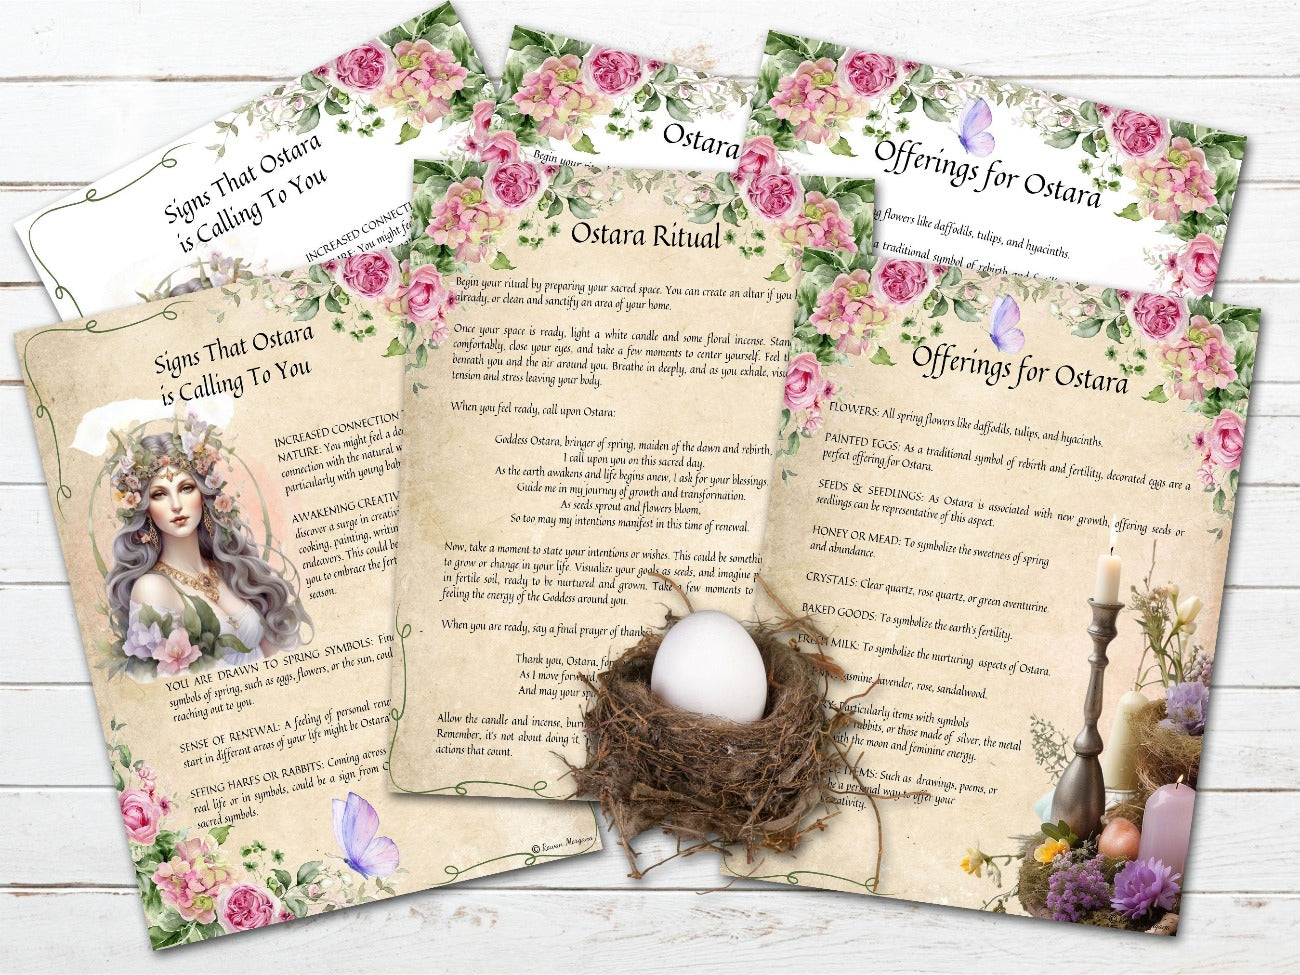 GODDESS OSTARA, Signs that Ostara is Calling to You, Ostara Ritual and Offerings for Ostara pages shown with both the parchment and white backgrounds - Morgana Magick Spell